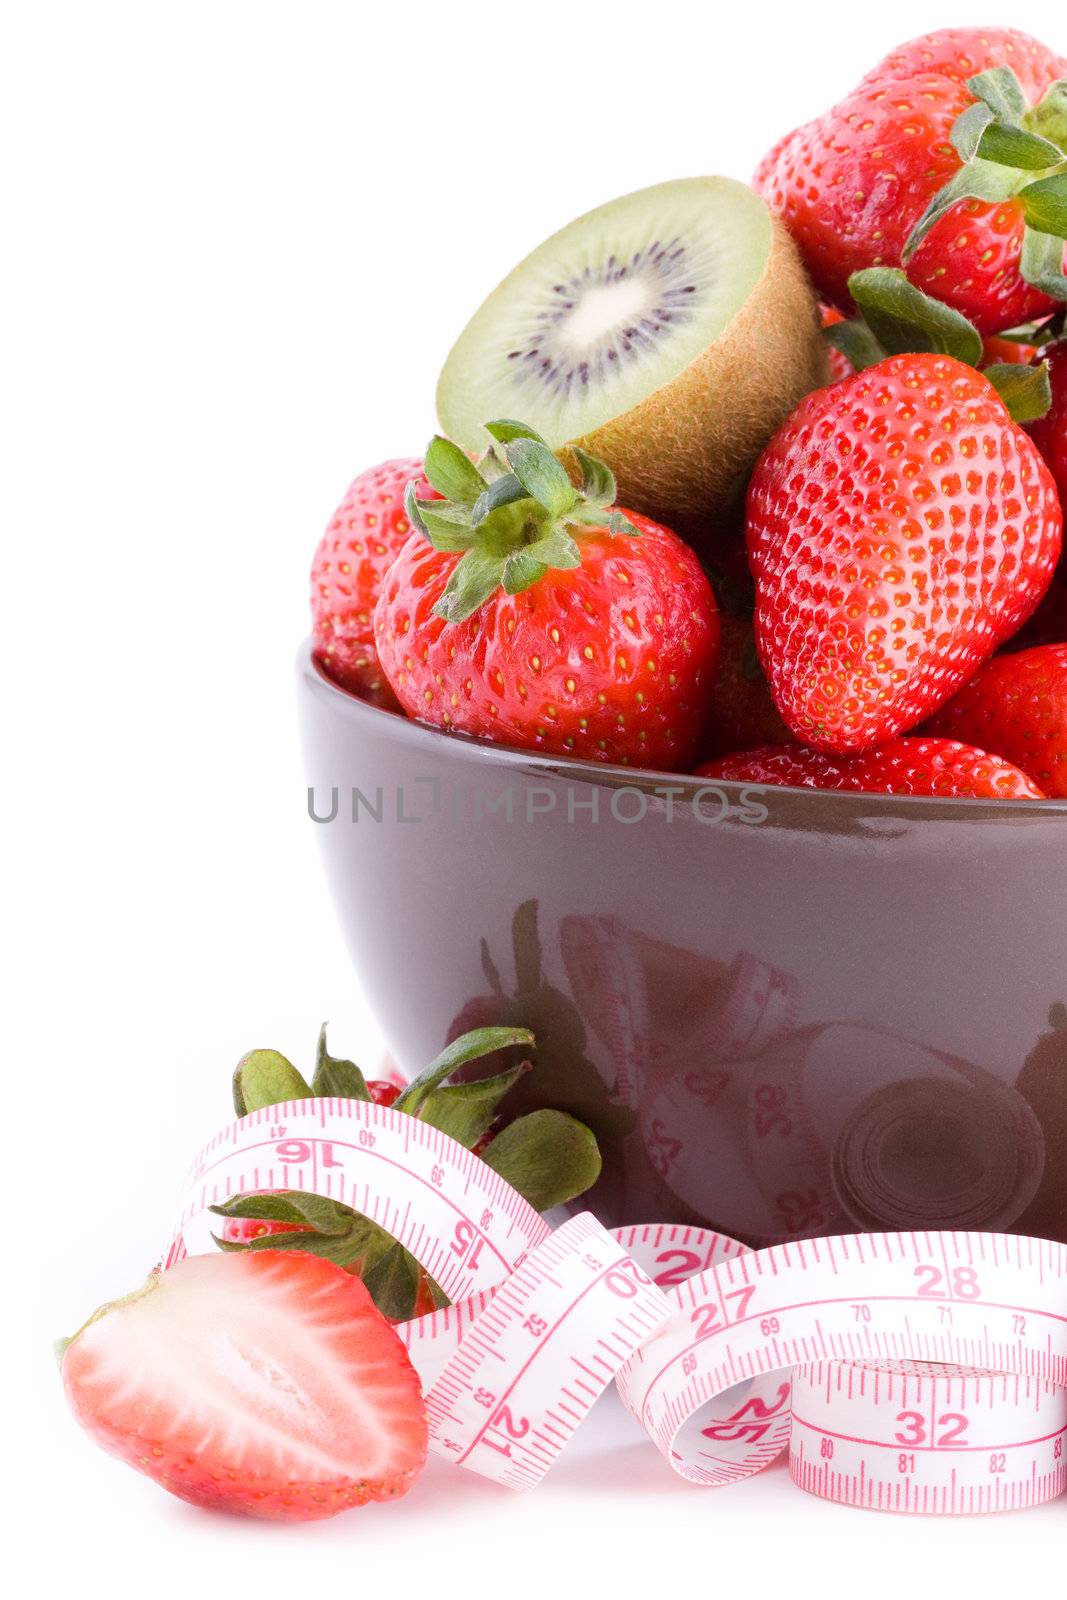 Closeup on fresh strawberries in a bowl with measure tape